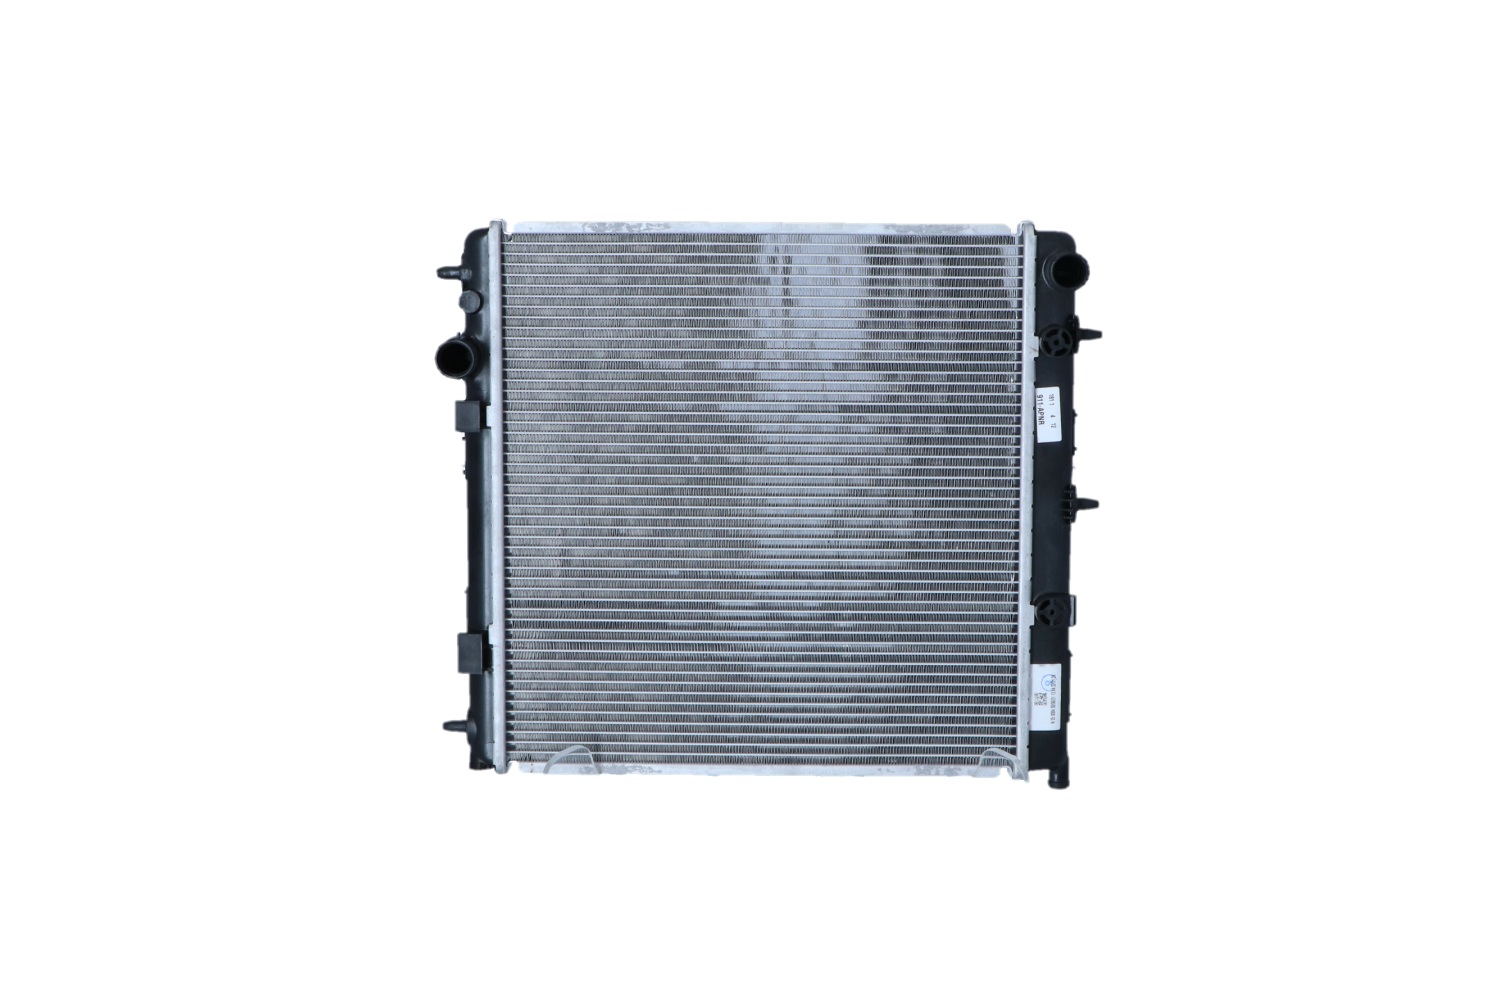 NRF 53531 Engine radiator Aluminium, 409 x 380 x 27 mm, with mounting parts, Brazed cooling fins